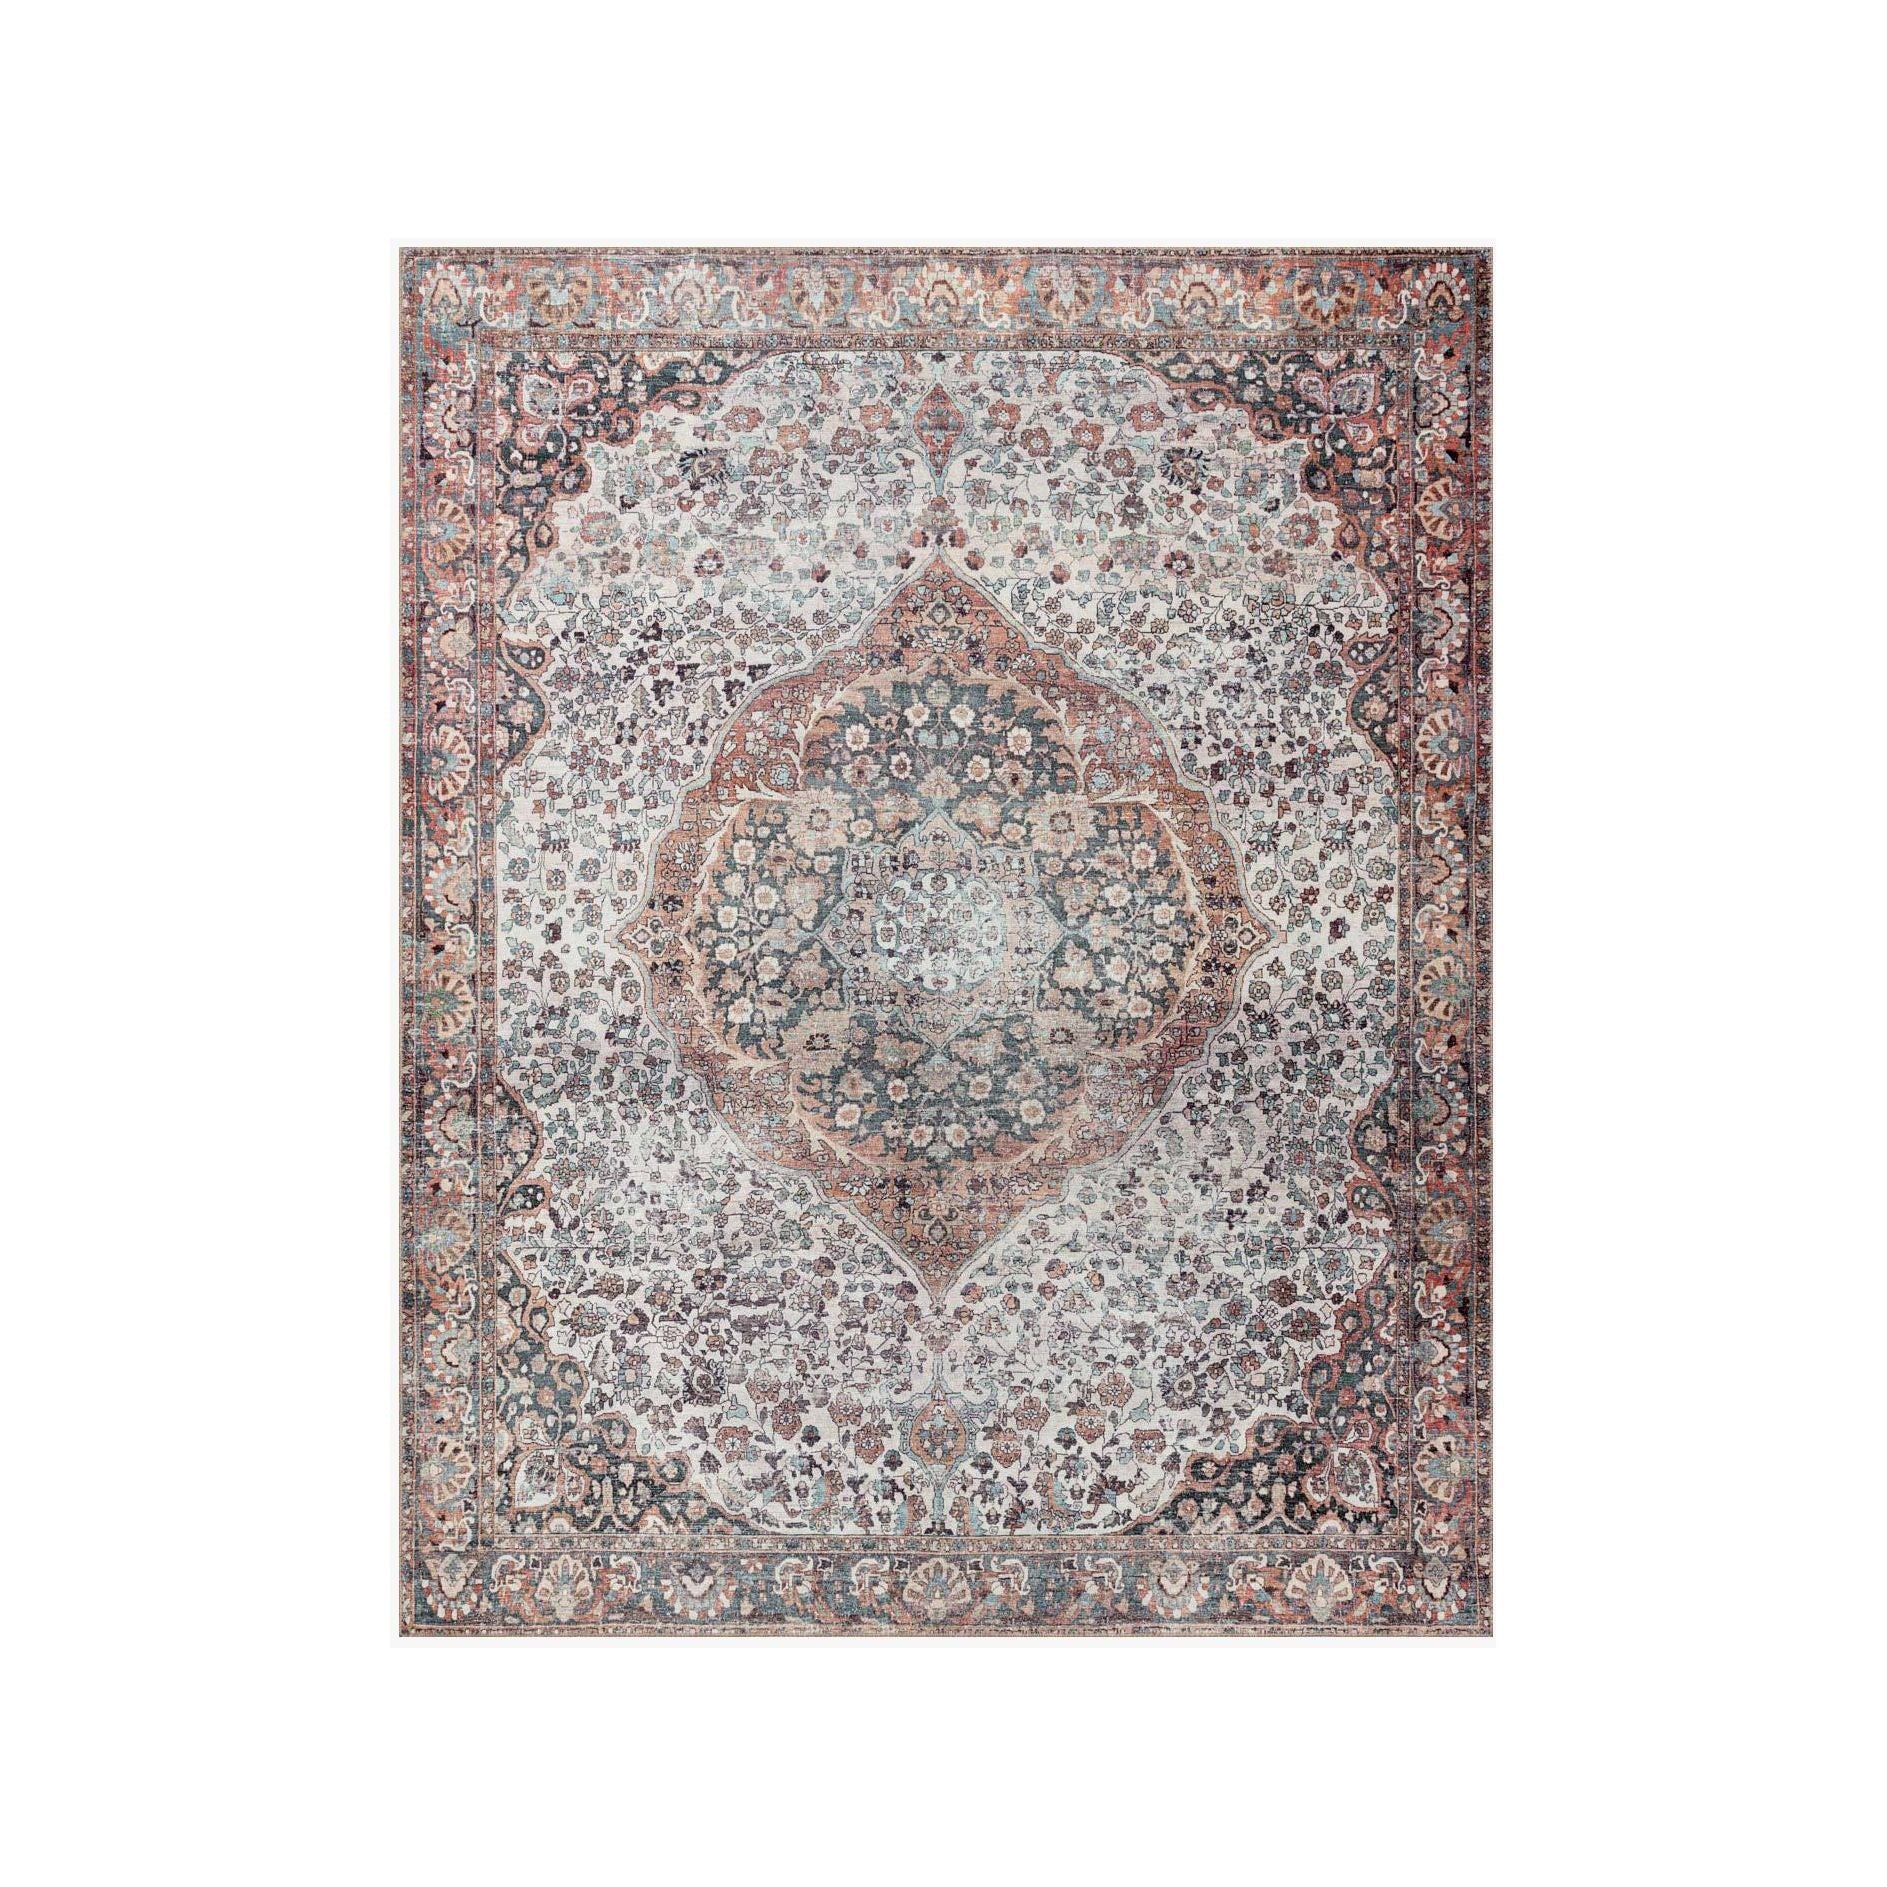 The Wynter Red / Multi area rug showcases a one-of-a-kind vintage or antique area rug look power-loomed of 100% polyester. This rug brings in tones of red, ivory, black, orange, and hints of blue. The rug is ideal for high traffic areas such as living rooms, dining rooms, kitchens, hallway, and entryways.